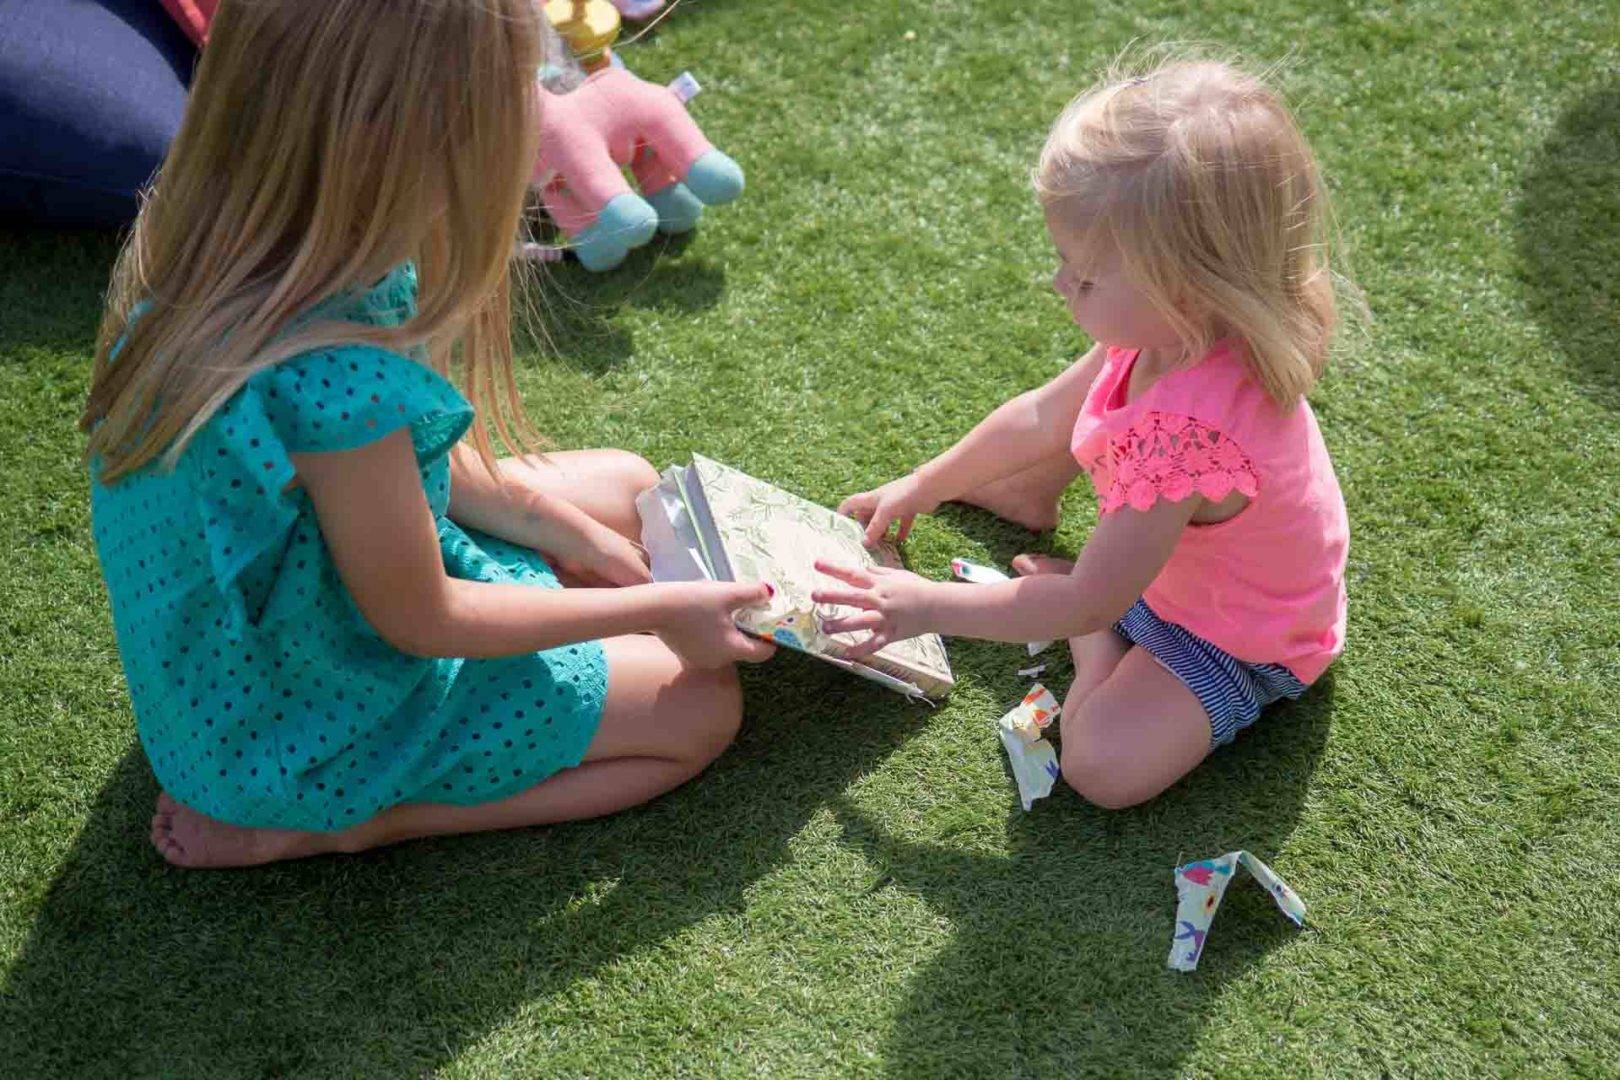 Artificial grass is child friendly